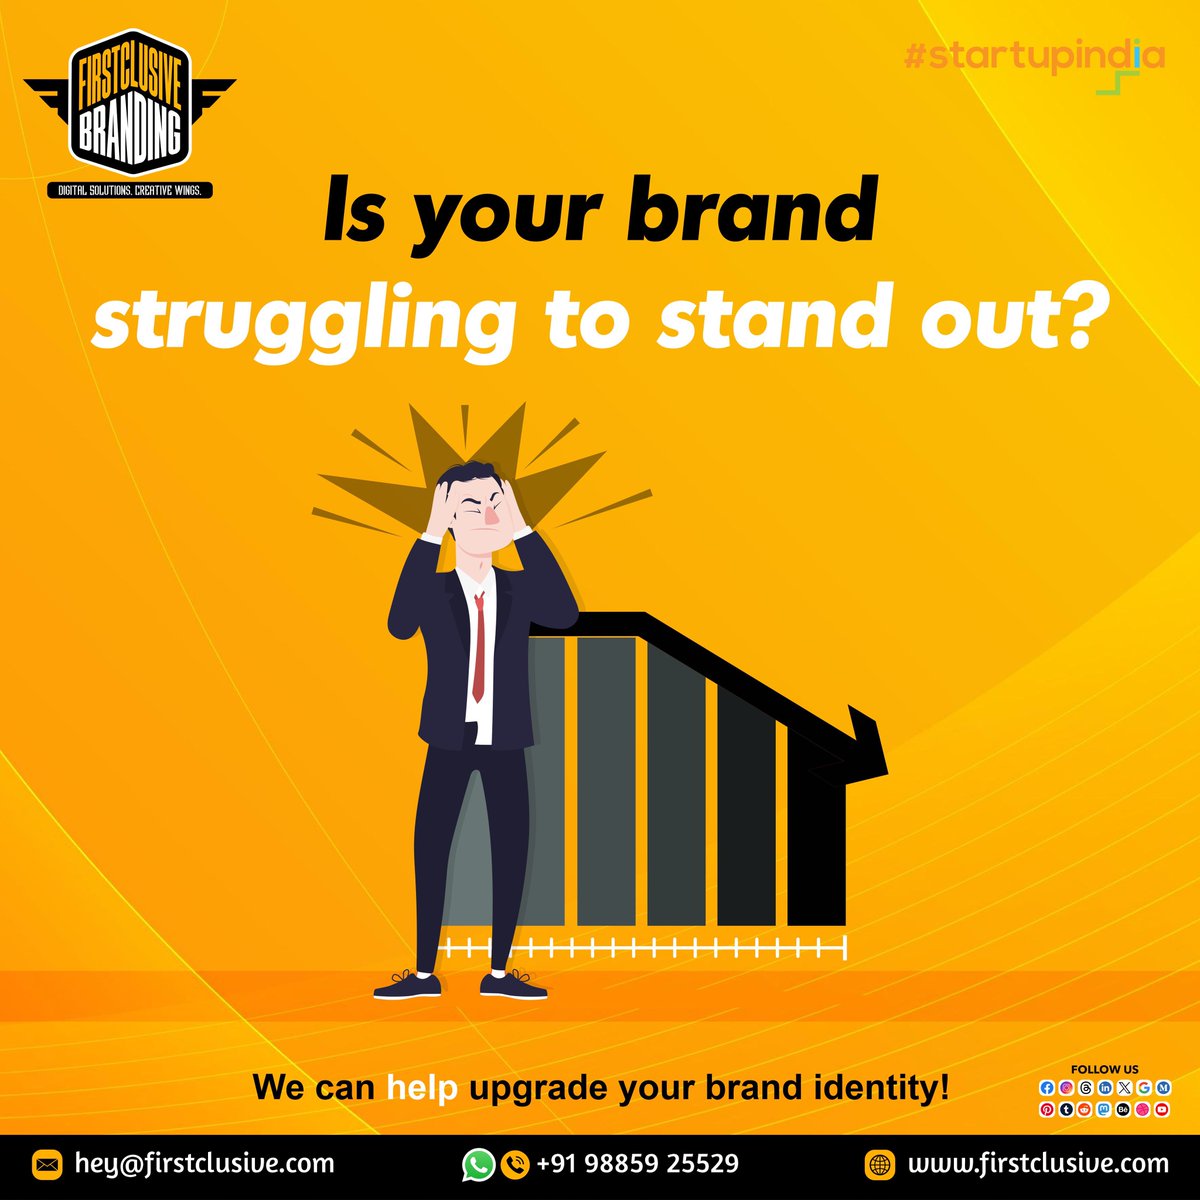 Is your brand blending into the crowd? Let us give it a makeover!

Our team at Firstclusive specializes in upgrading brand identities, making you stand out in the market. 

#BrandIdentity #LogoDesign #Branding #BrandReputation #LogoBranding #FirstclusiveBranding #StartupIndia